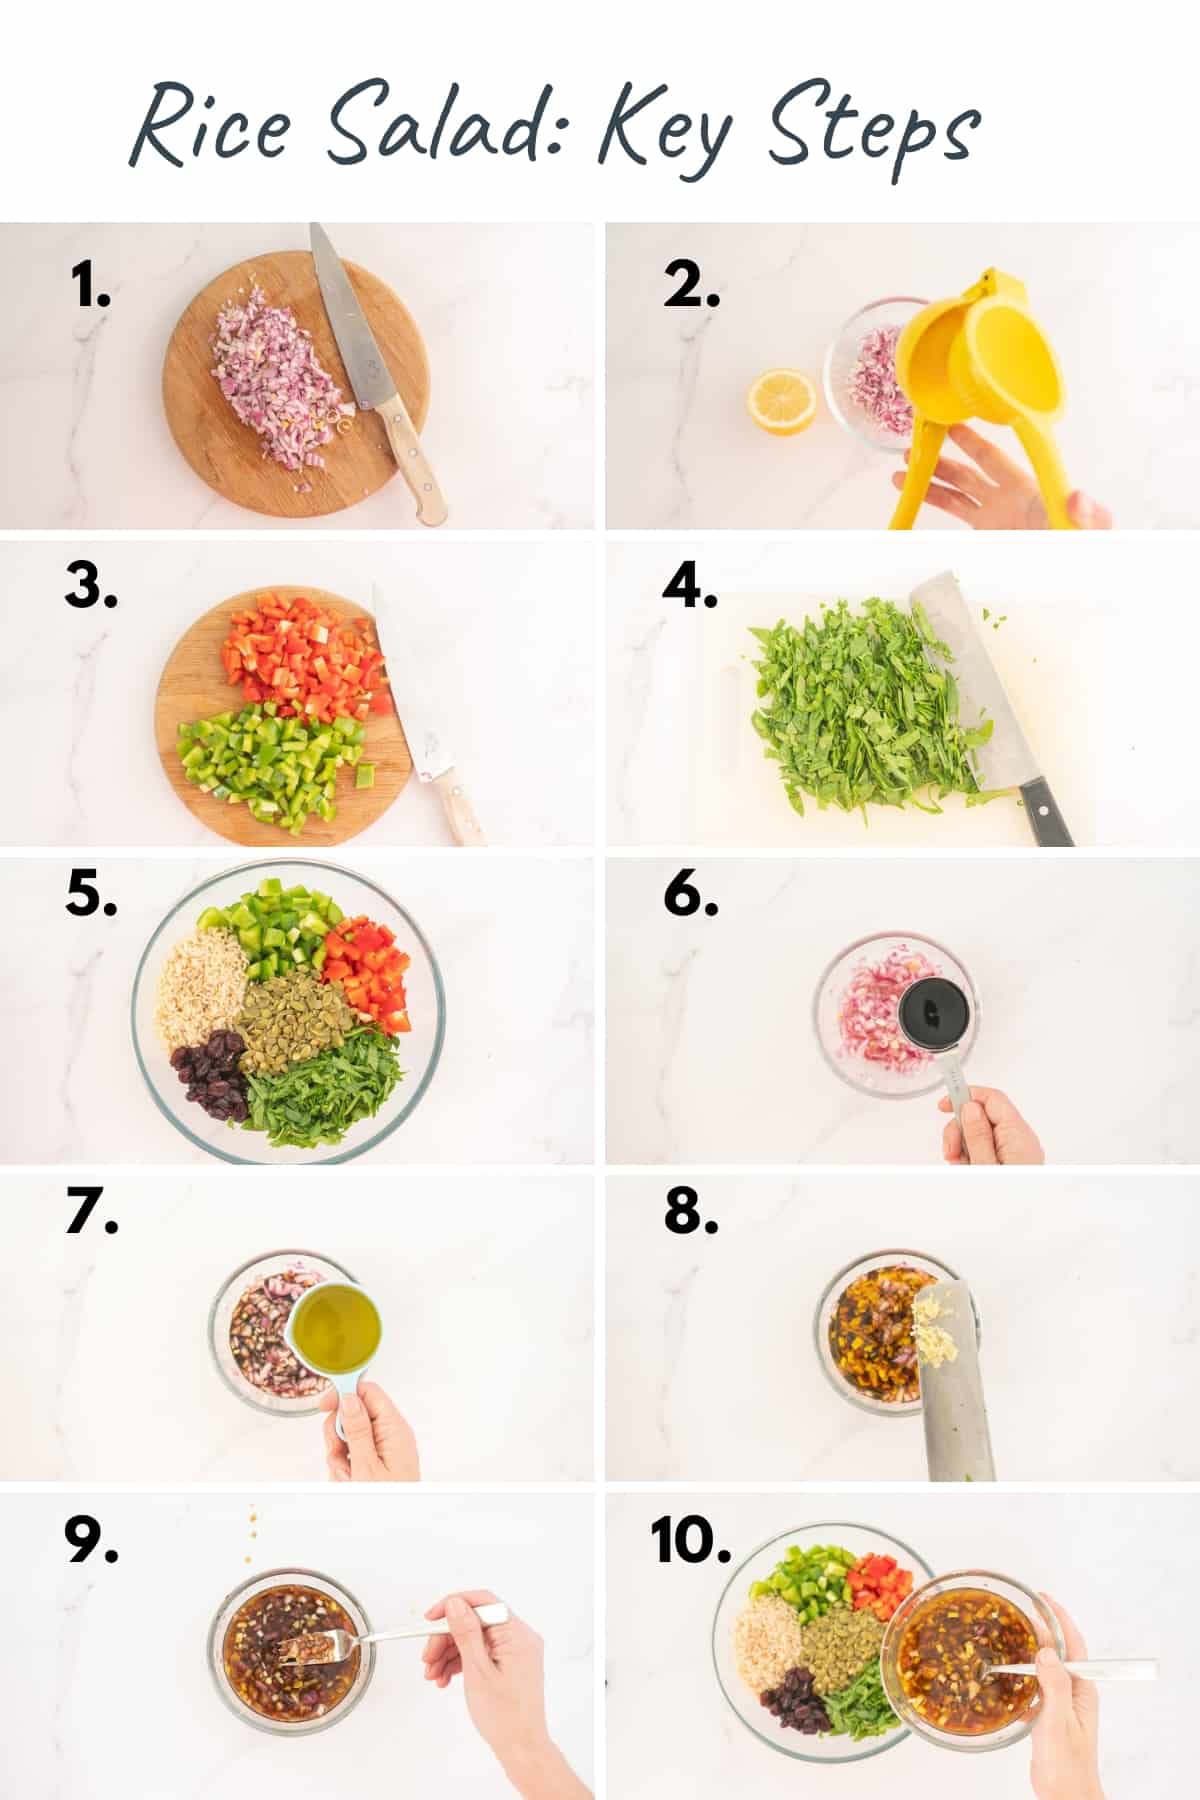 Ten image collage showing the key steps to making rice salad